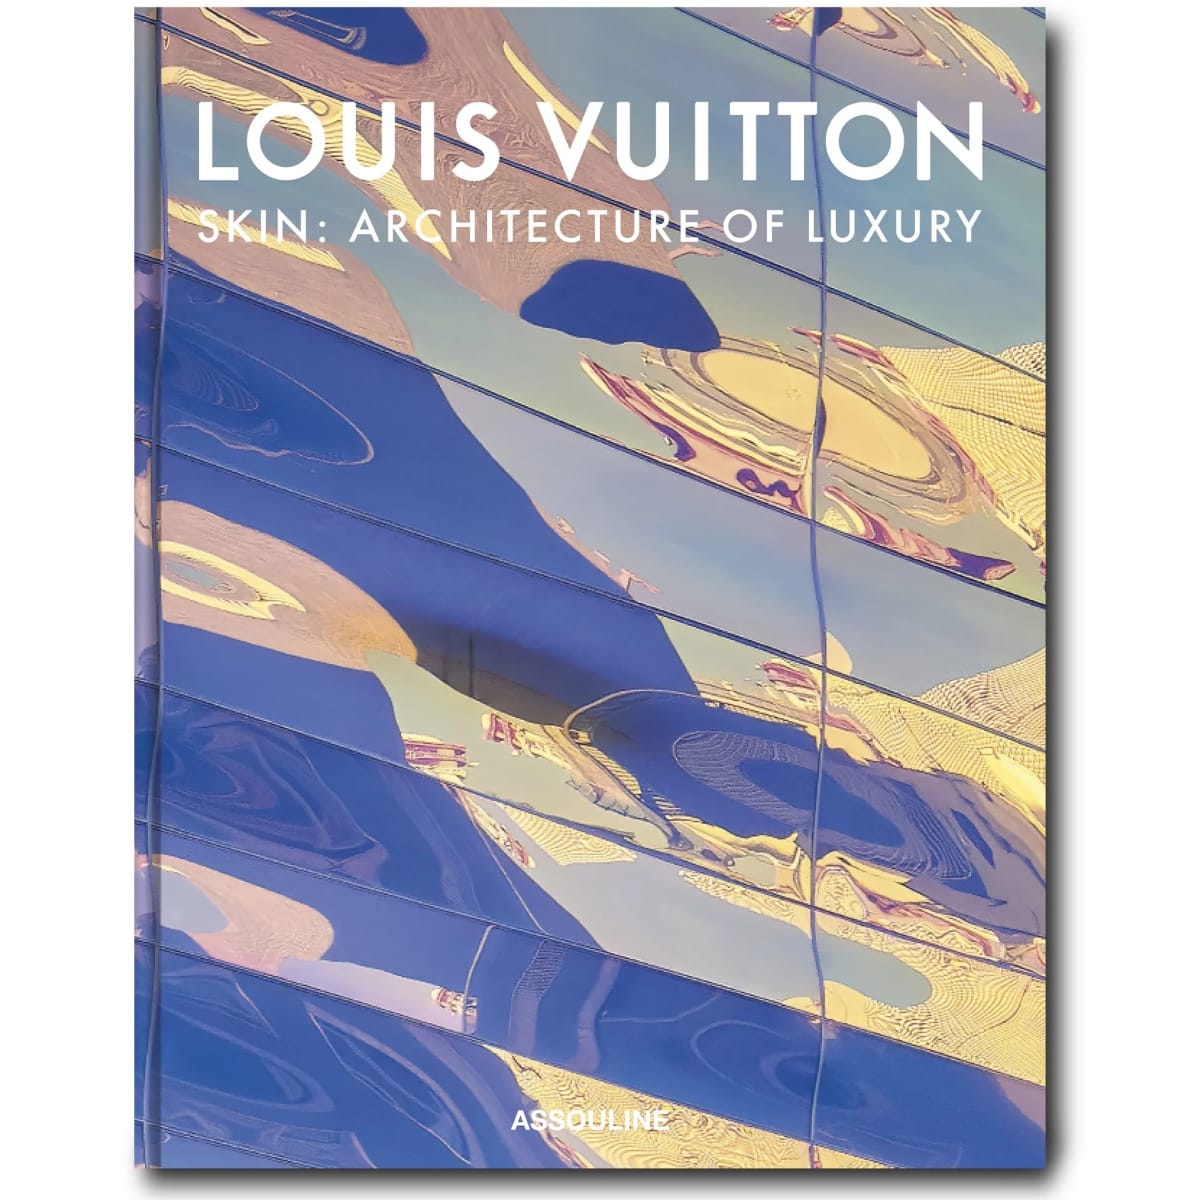 Louis Vuitton Skin (Beijing Cover) : Architecture of Luxury - Paul